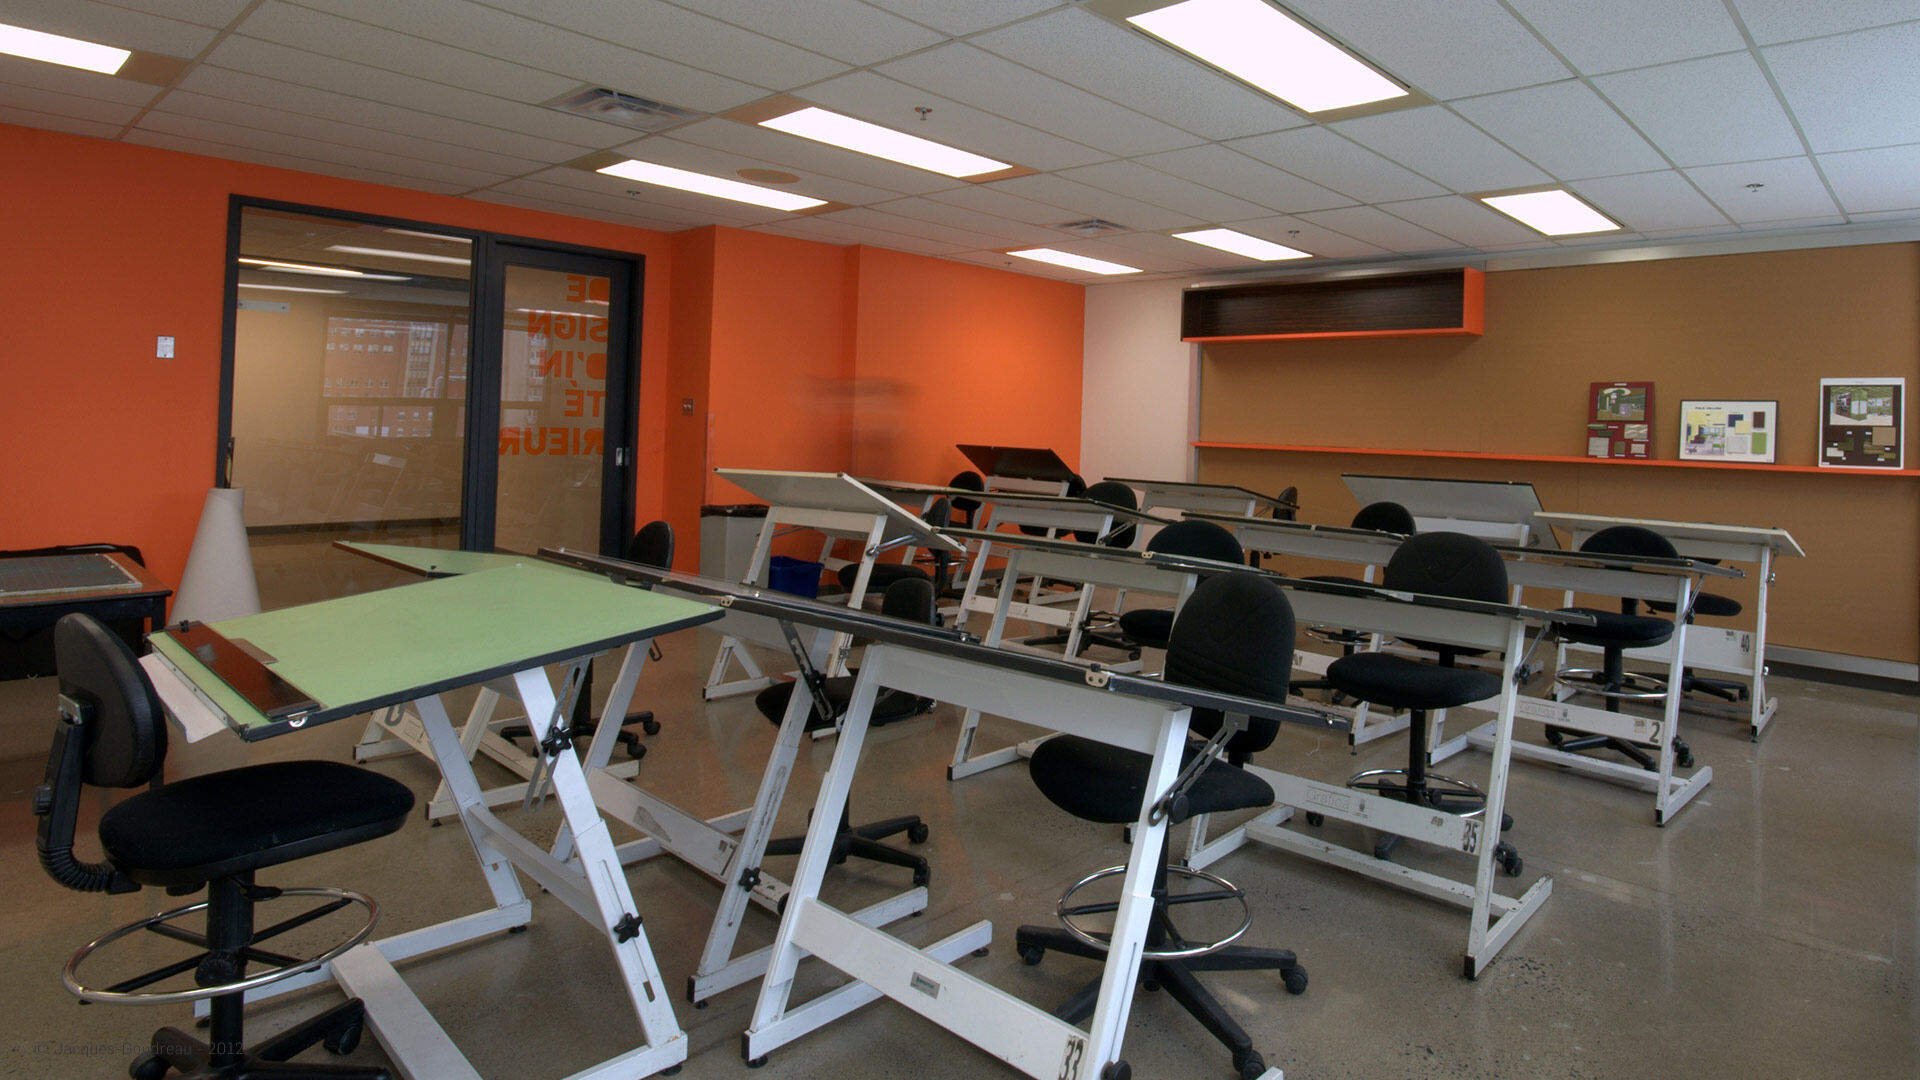 An educational drafting room with drawing boards and stools, empty and ready for an art class.